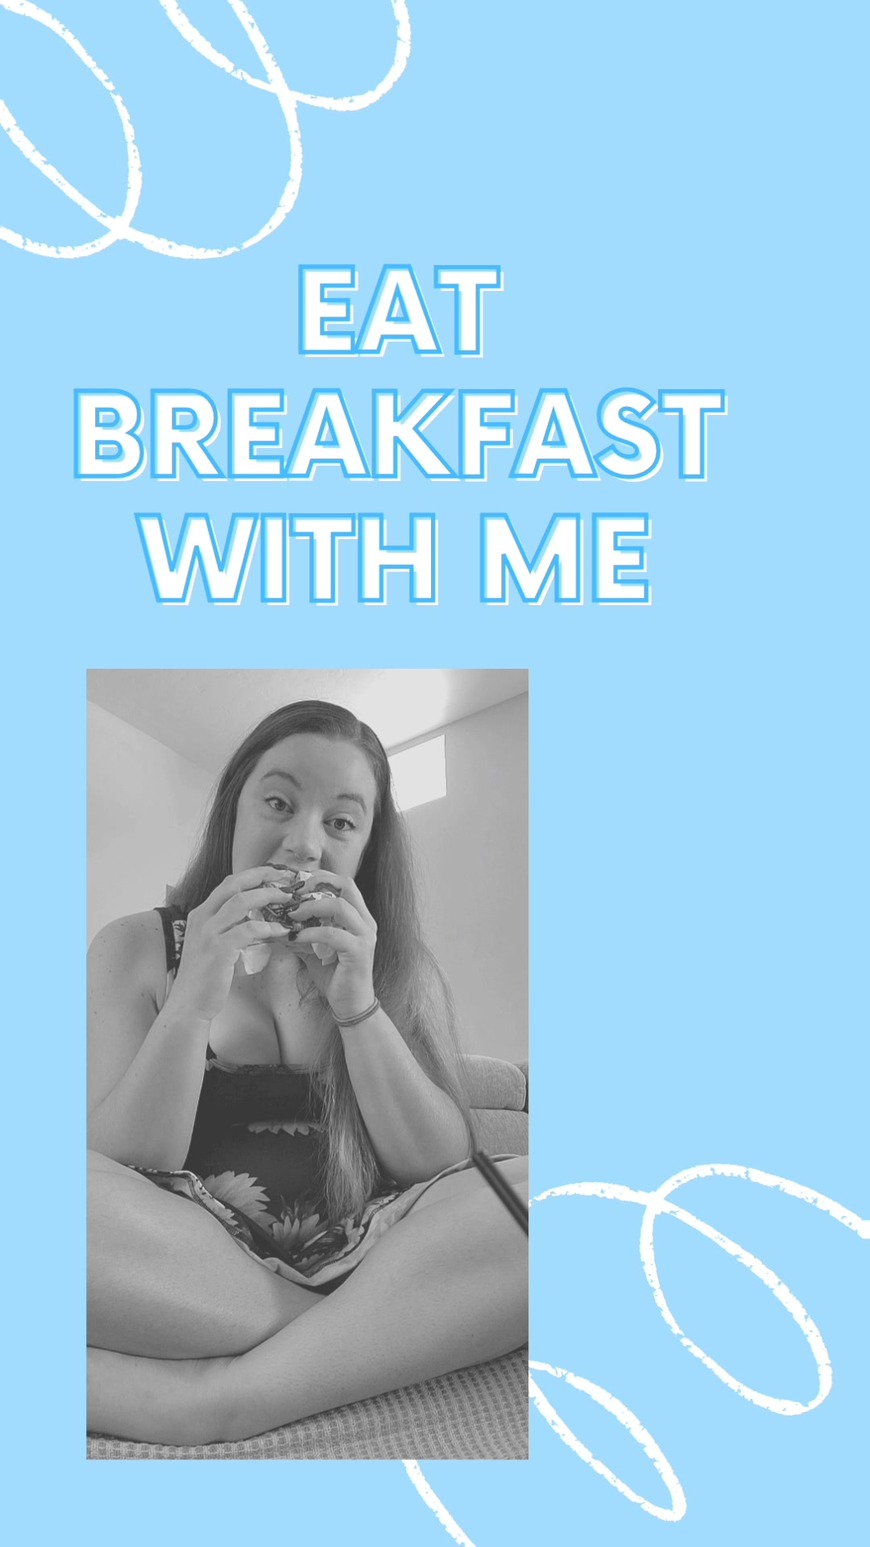 Eat breakfast with me - clip cover-back